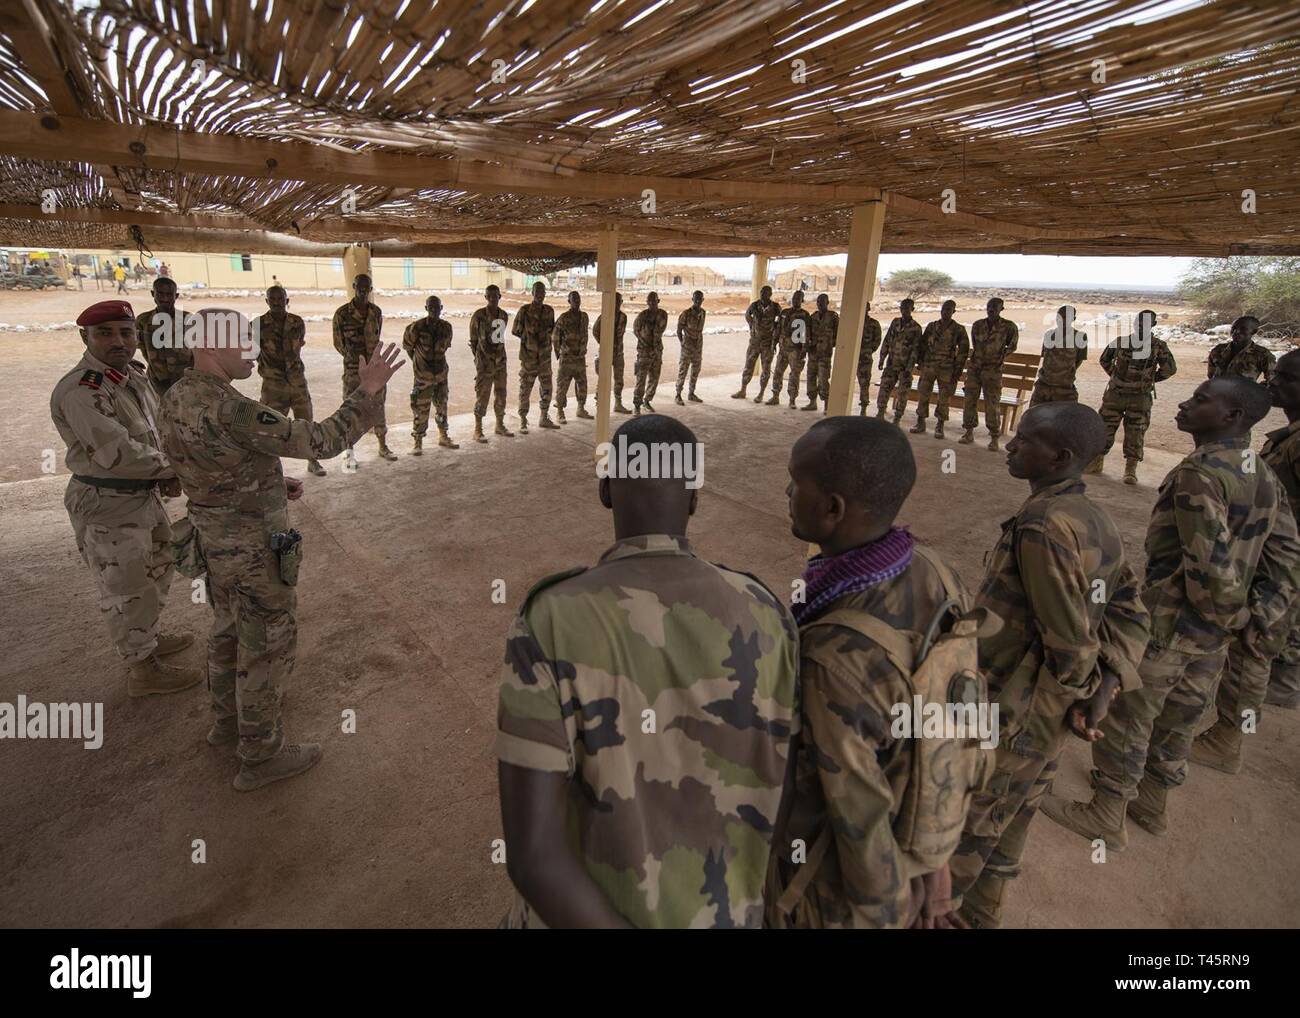 U.S. Army Capt. Joseph Brunone, the commander of Headquarters Company, 1-141 Infantry Regiment, Task Force Alamo, Texas National Guard, assigned to Combined Joint Task Force-Horn of Africa, gives opening remarks during an infantry skills course graduation for Rapid Intervention Battalion (RIB) soldiers from the Djiboutian army’s elite military force at a training location near Djibouti, March 7, 2019. Task Force Alamo Soldiers provided the training to the RIB soldiers. Stock Photo